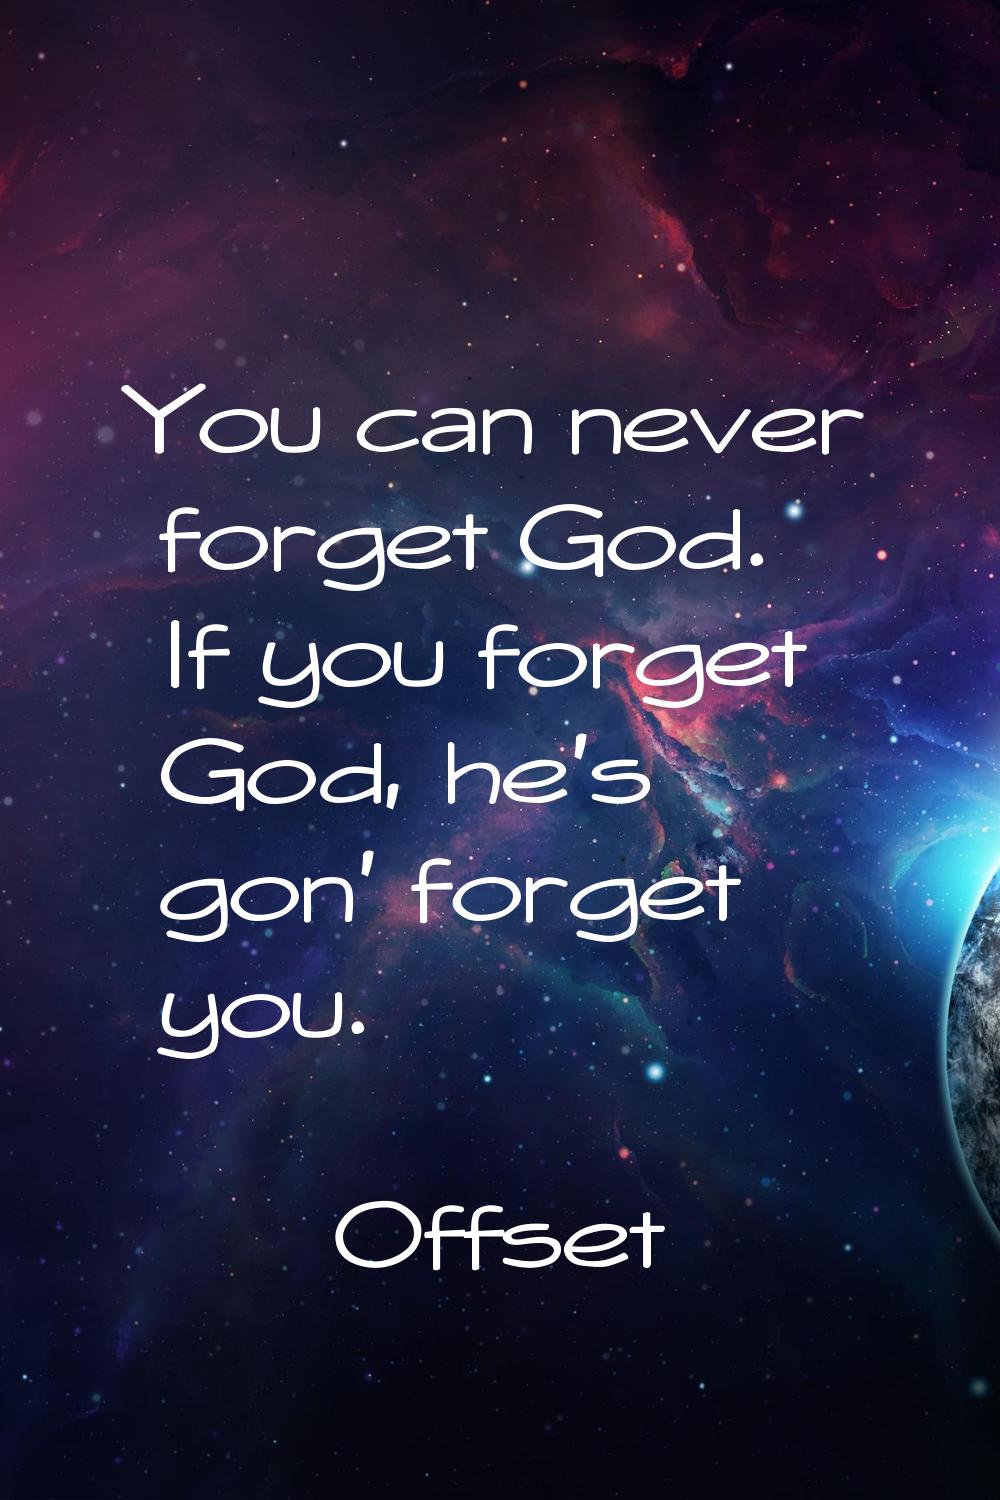 You can never forget God. If you forget God, he's gon' forget you.